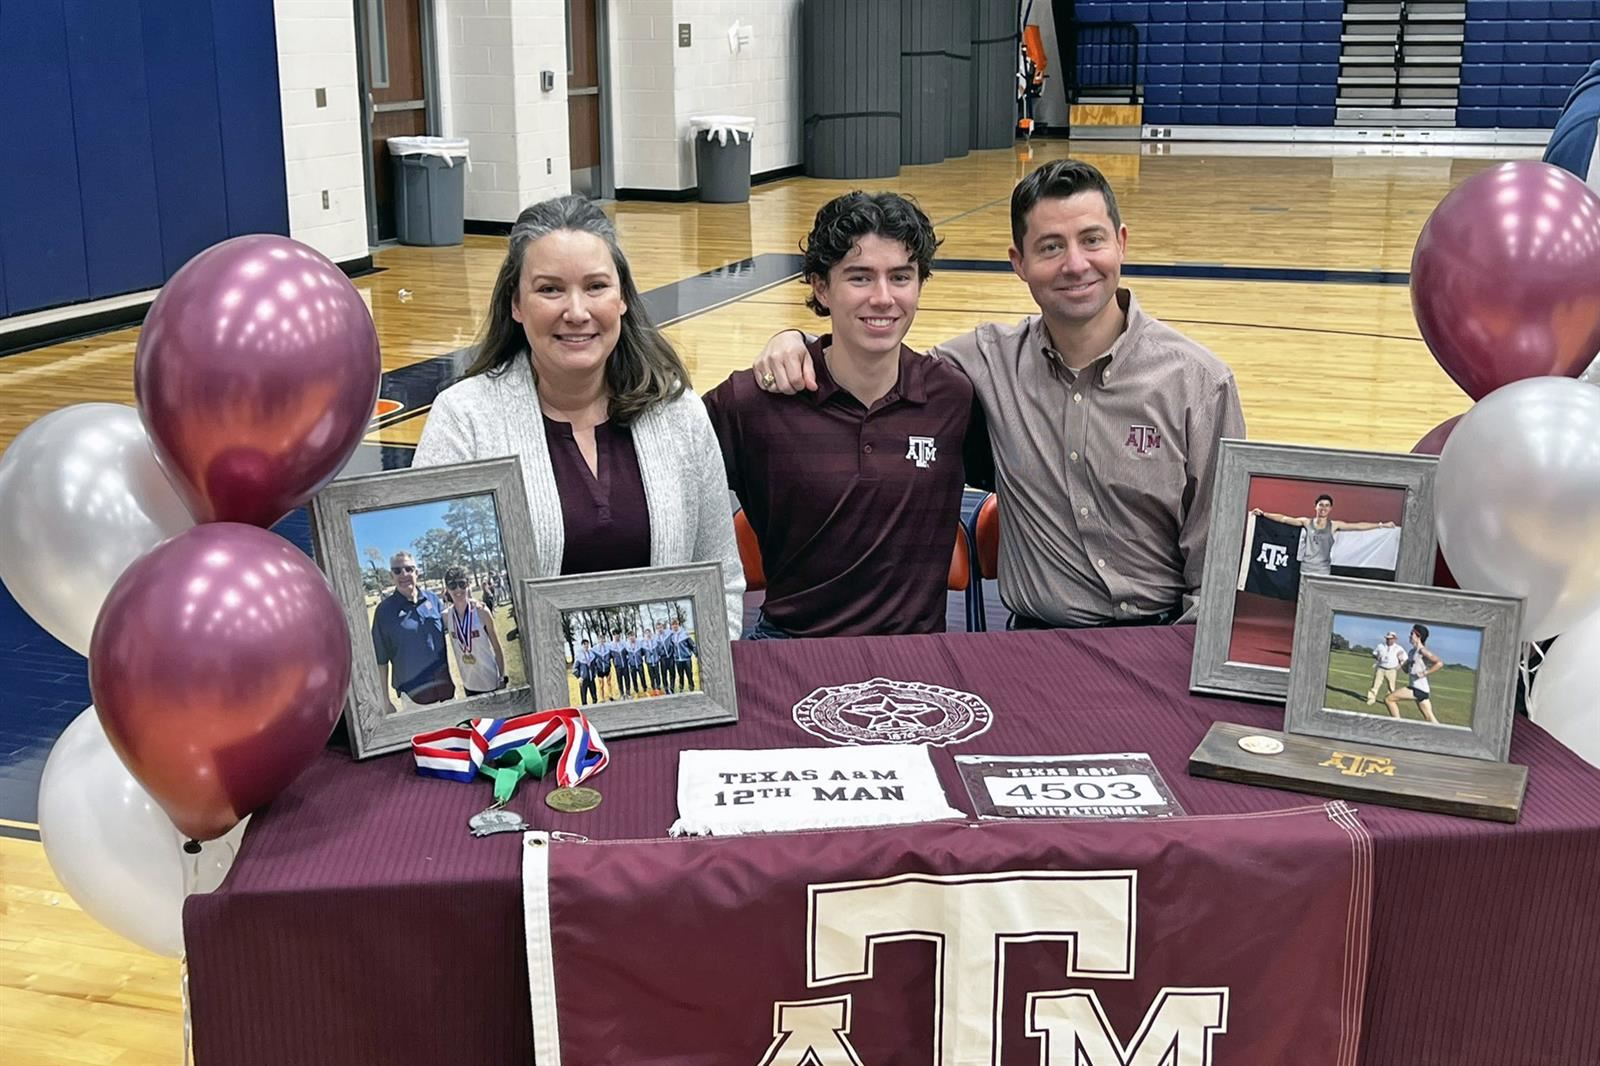 Bridgeland High School senior Noah Willows, center, signed a letter of intent to run cross country at Texas A&M University.